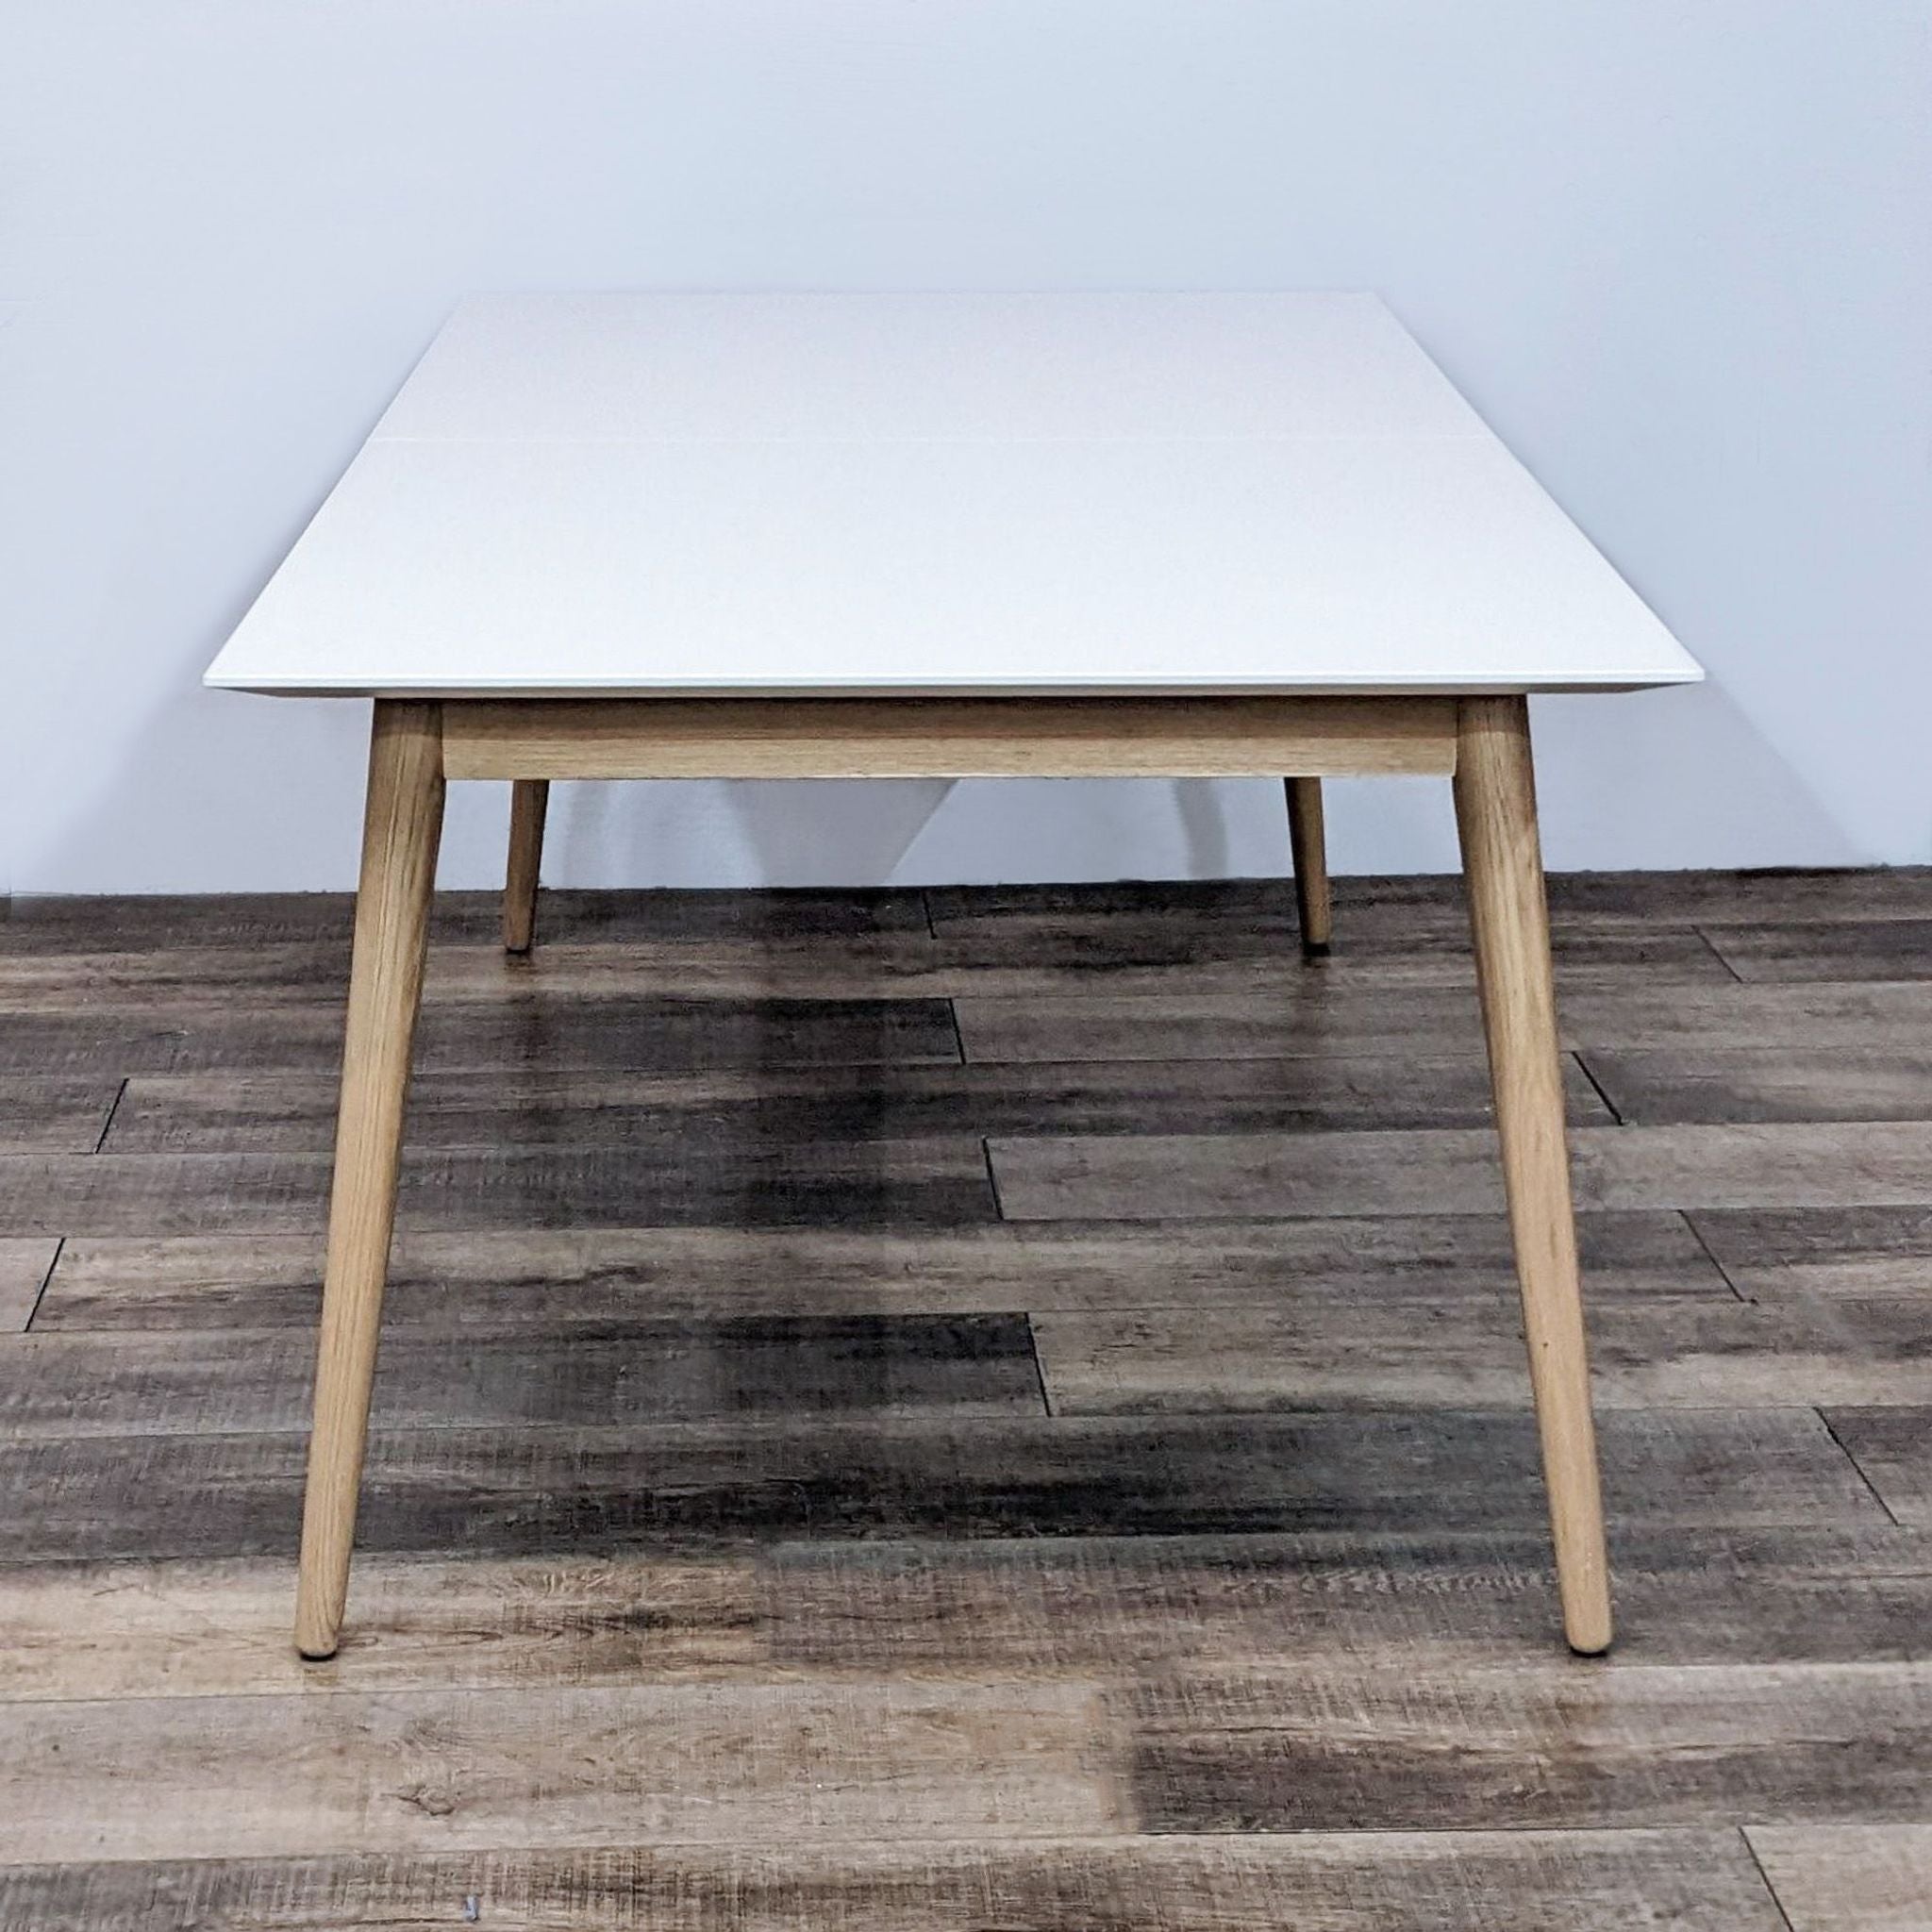 BoConcept Milano modern minimalistic dining table, showcasing a compact sleek white tabletop with warm wooden legs.